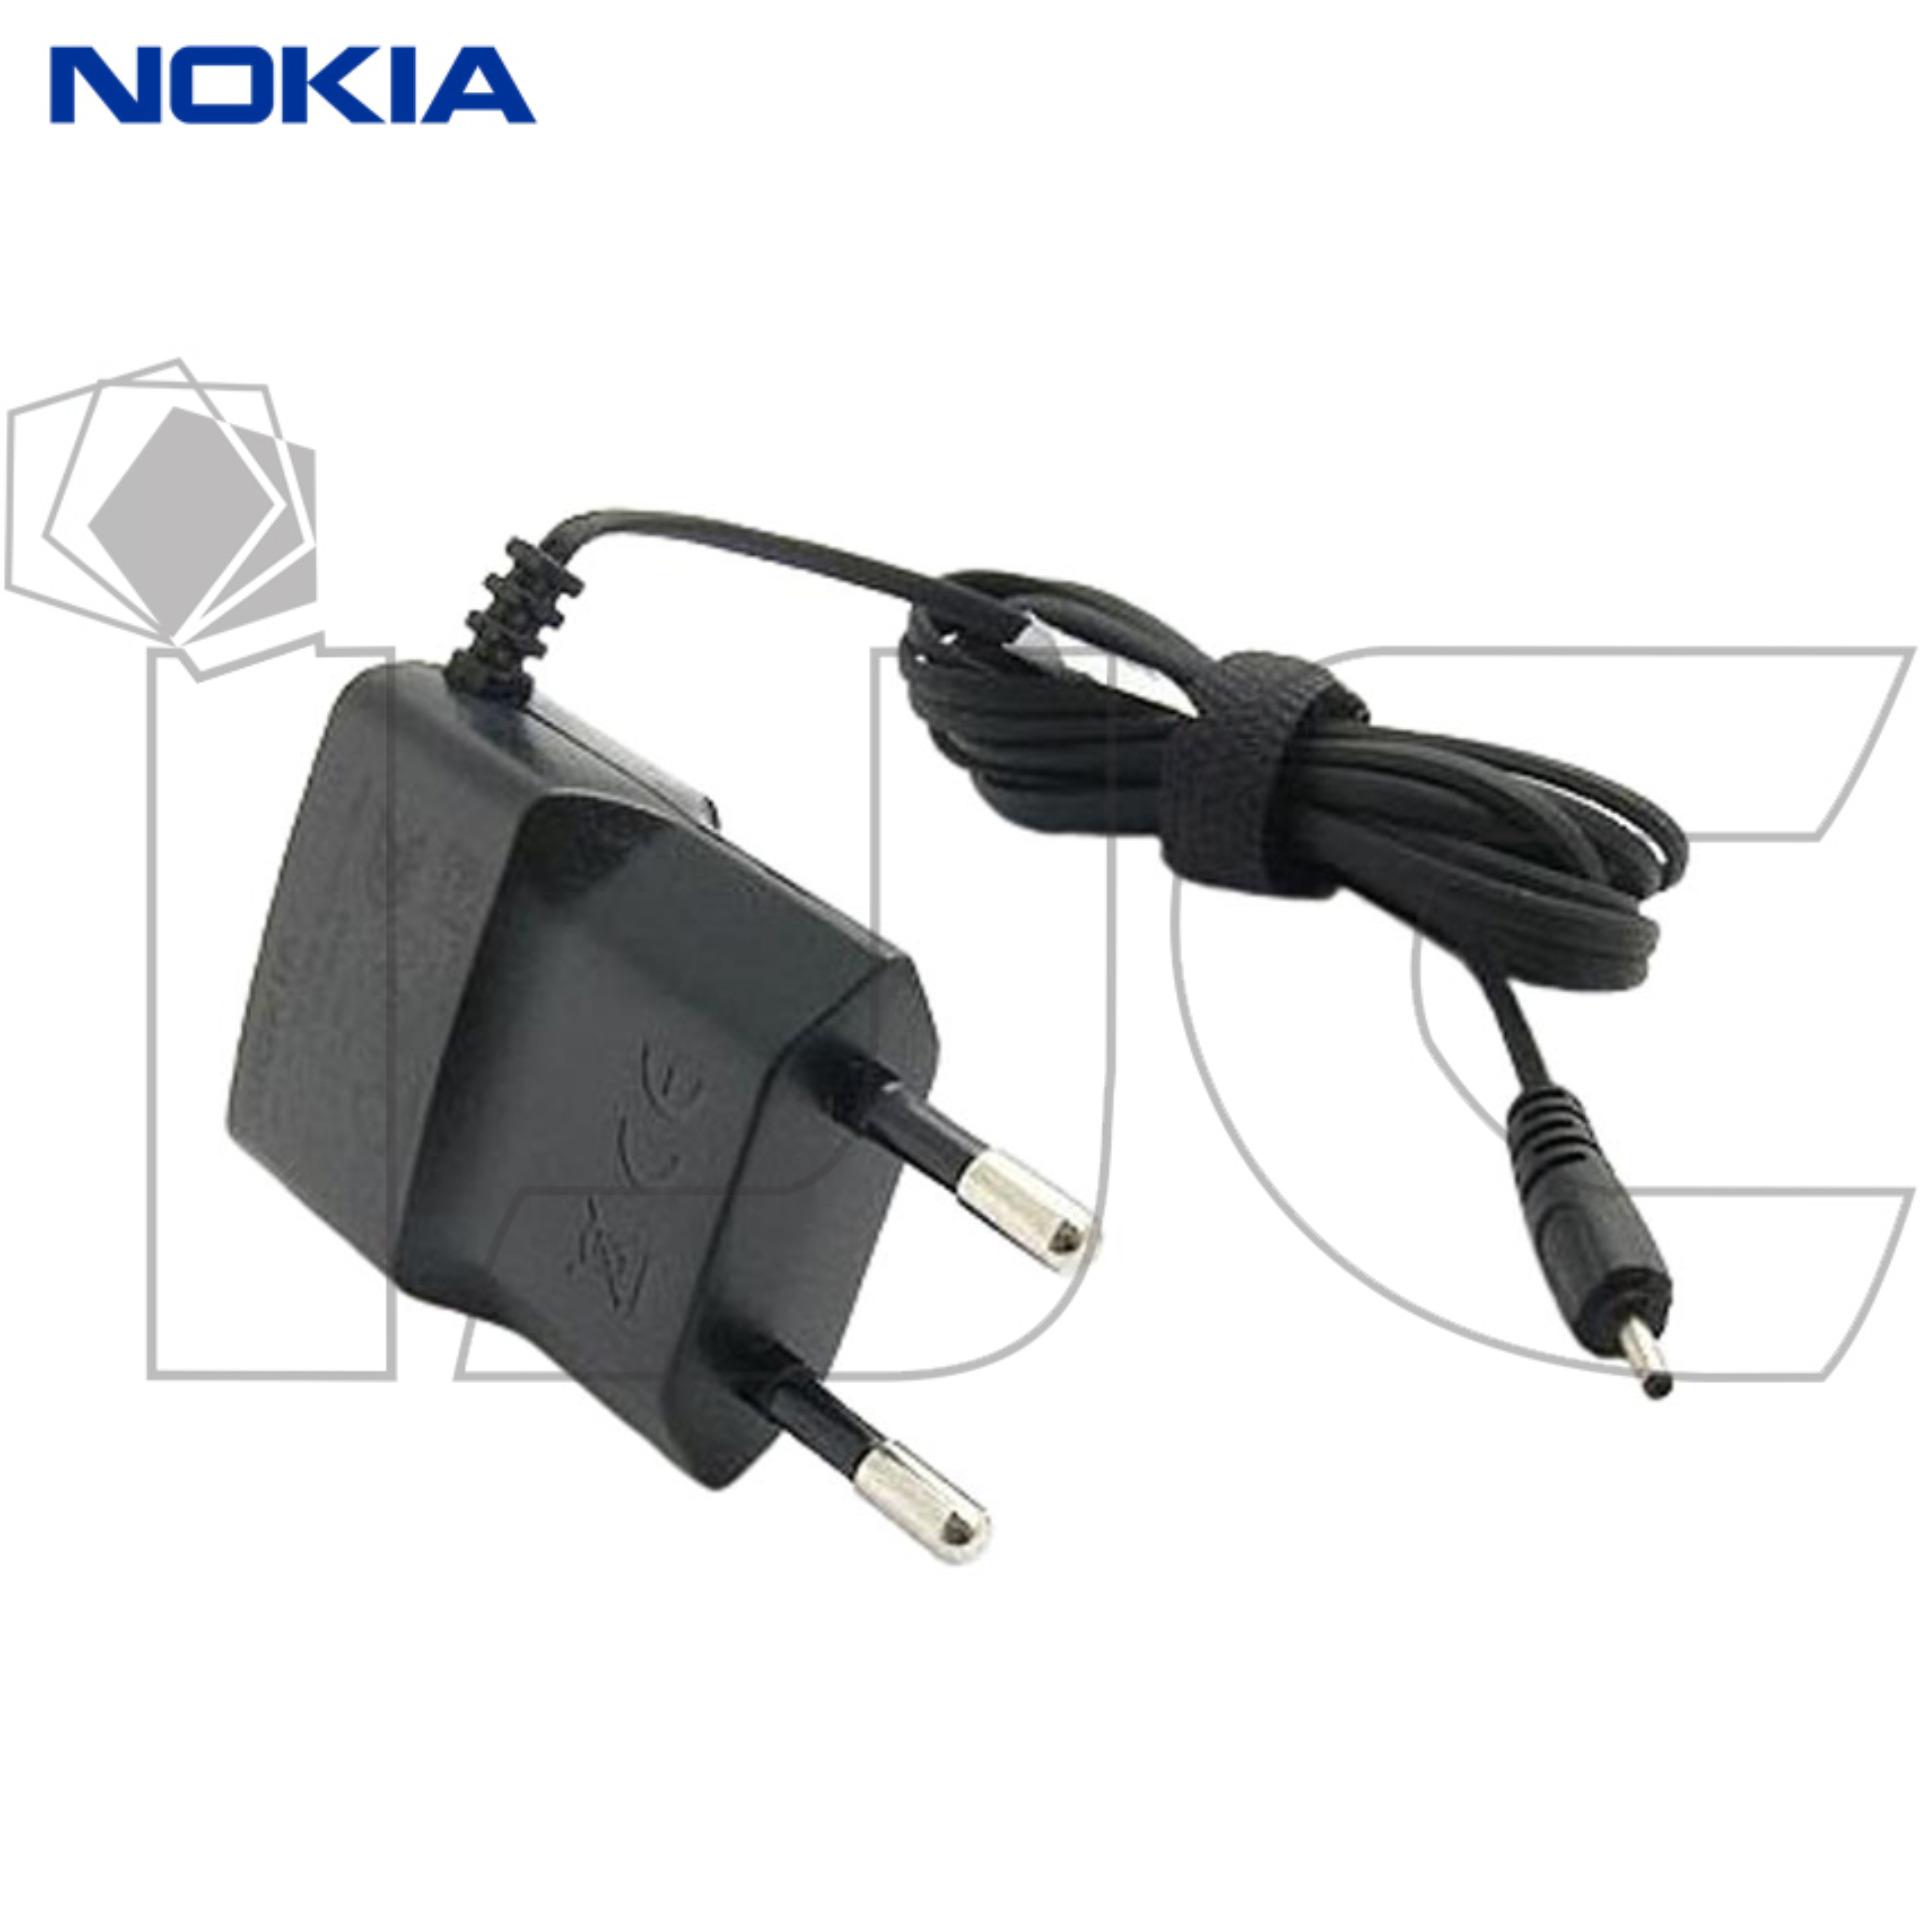 Nokia Travel Charger Jeck Kecil